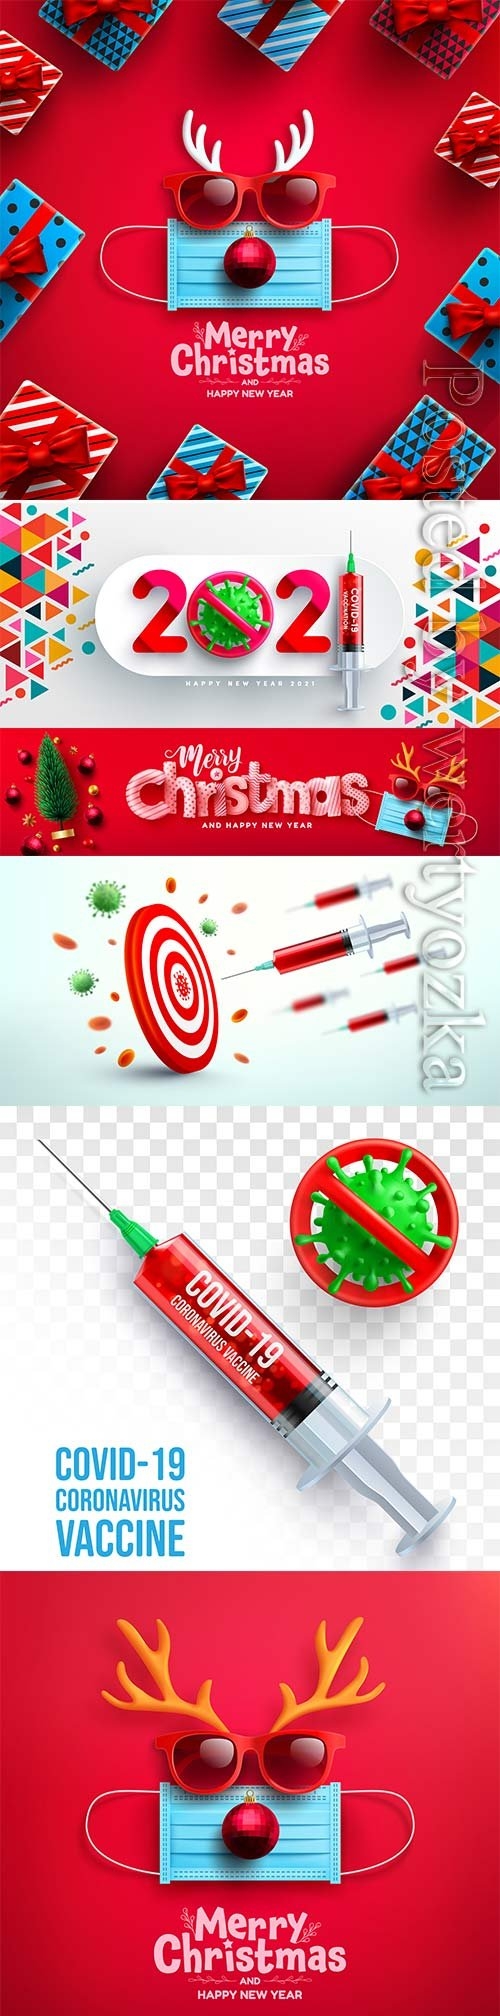 Happy new year with virus and red covid vaccine syringe, pandemic concept